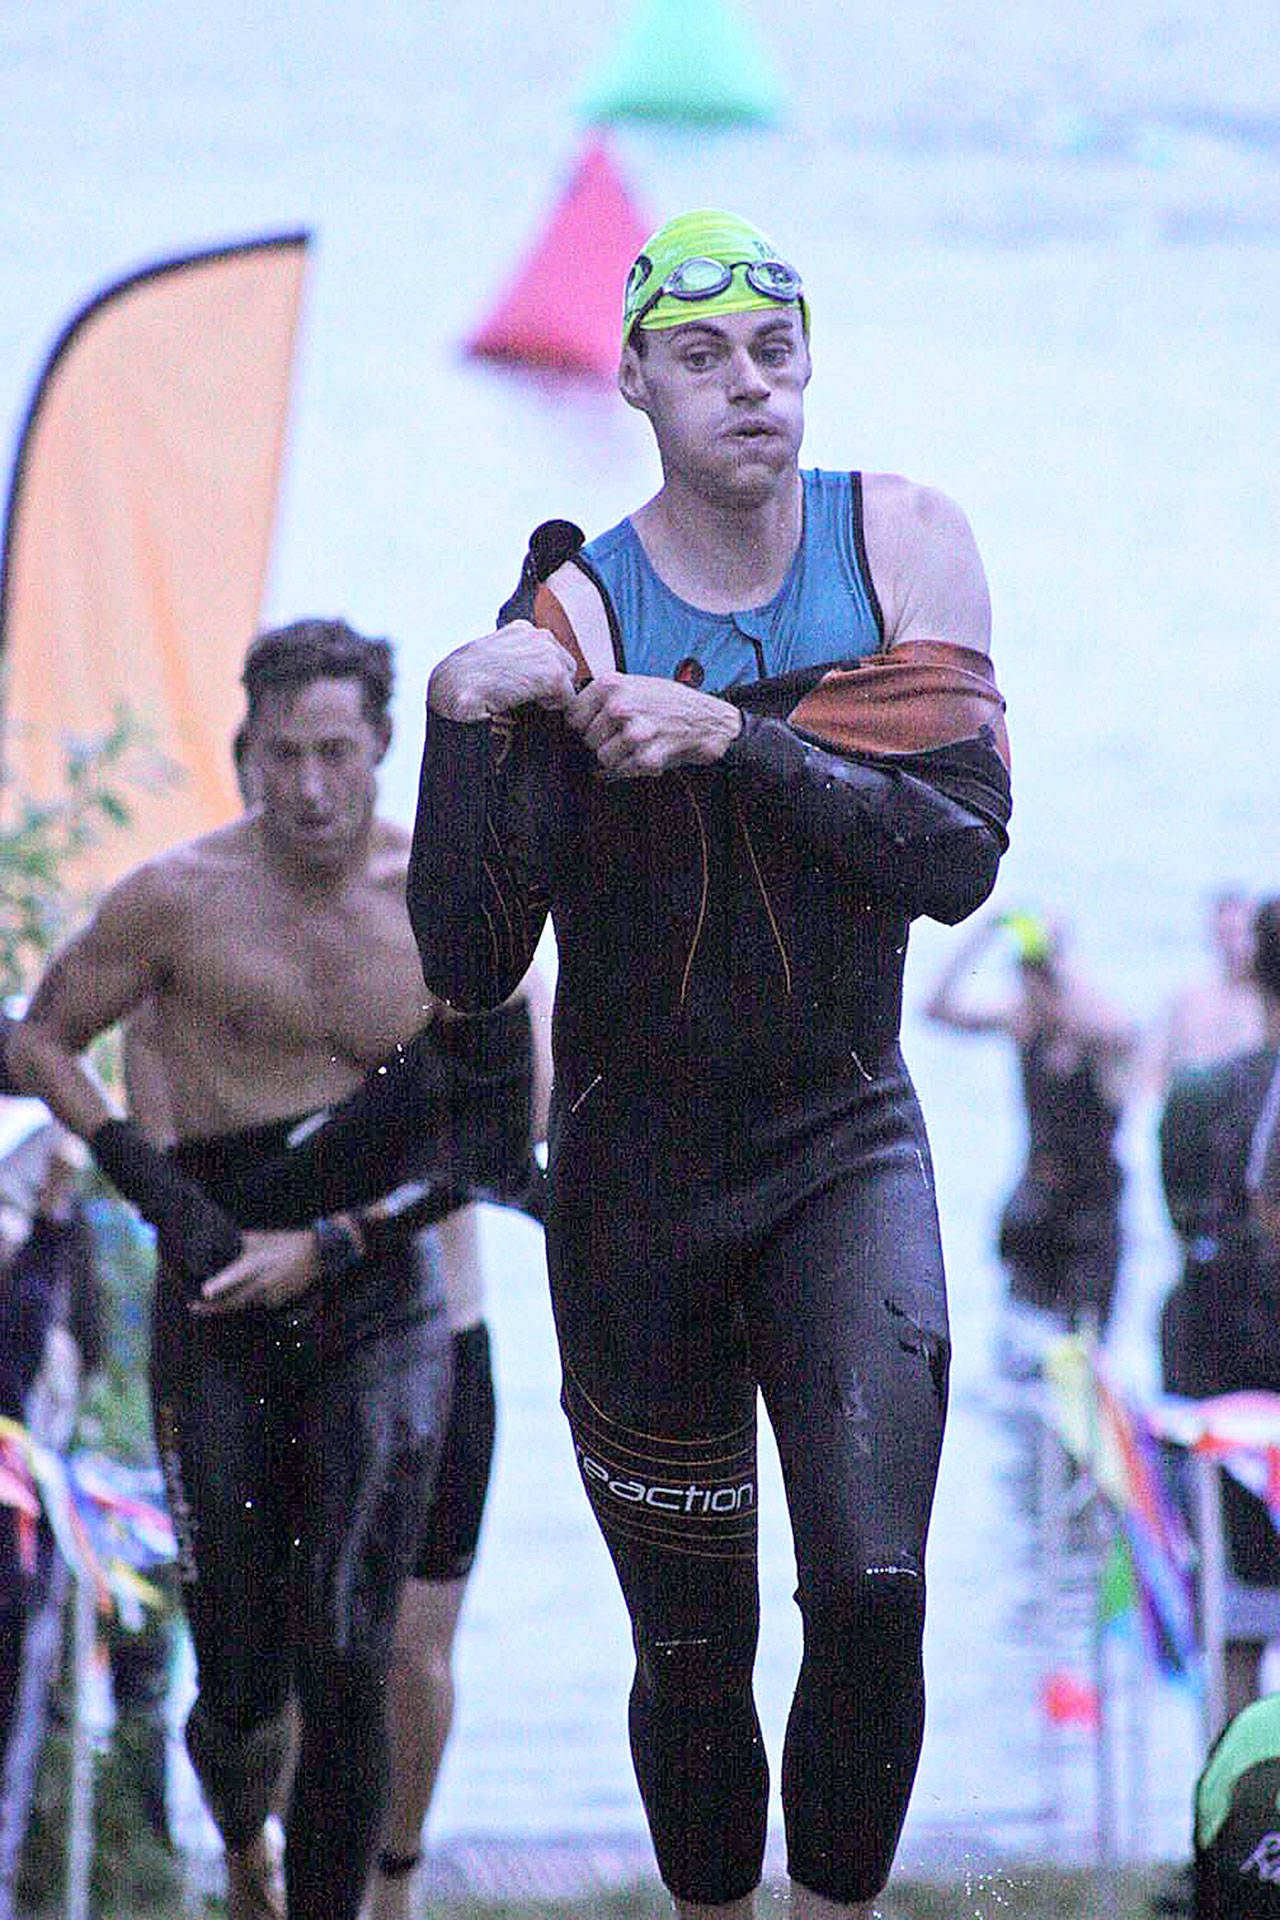 Andrew Richards, who finished second in the men’s sprint wave division, tries to shed his wet suit after leaving the Lake Meridian waters in the opening swim segment en route to the transition area for the bike leg. MARK KLAAS, Kent Reporter